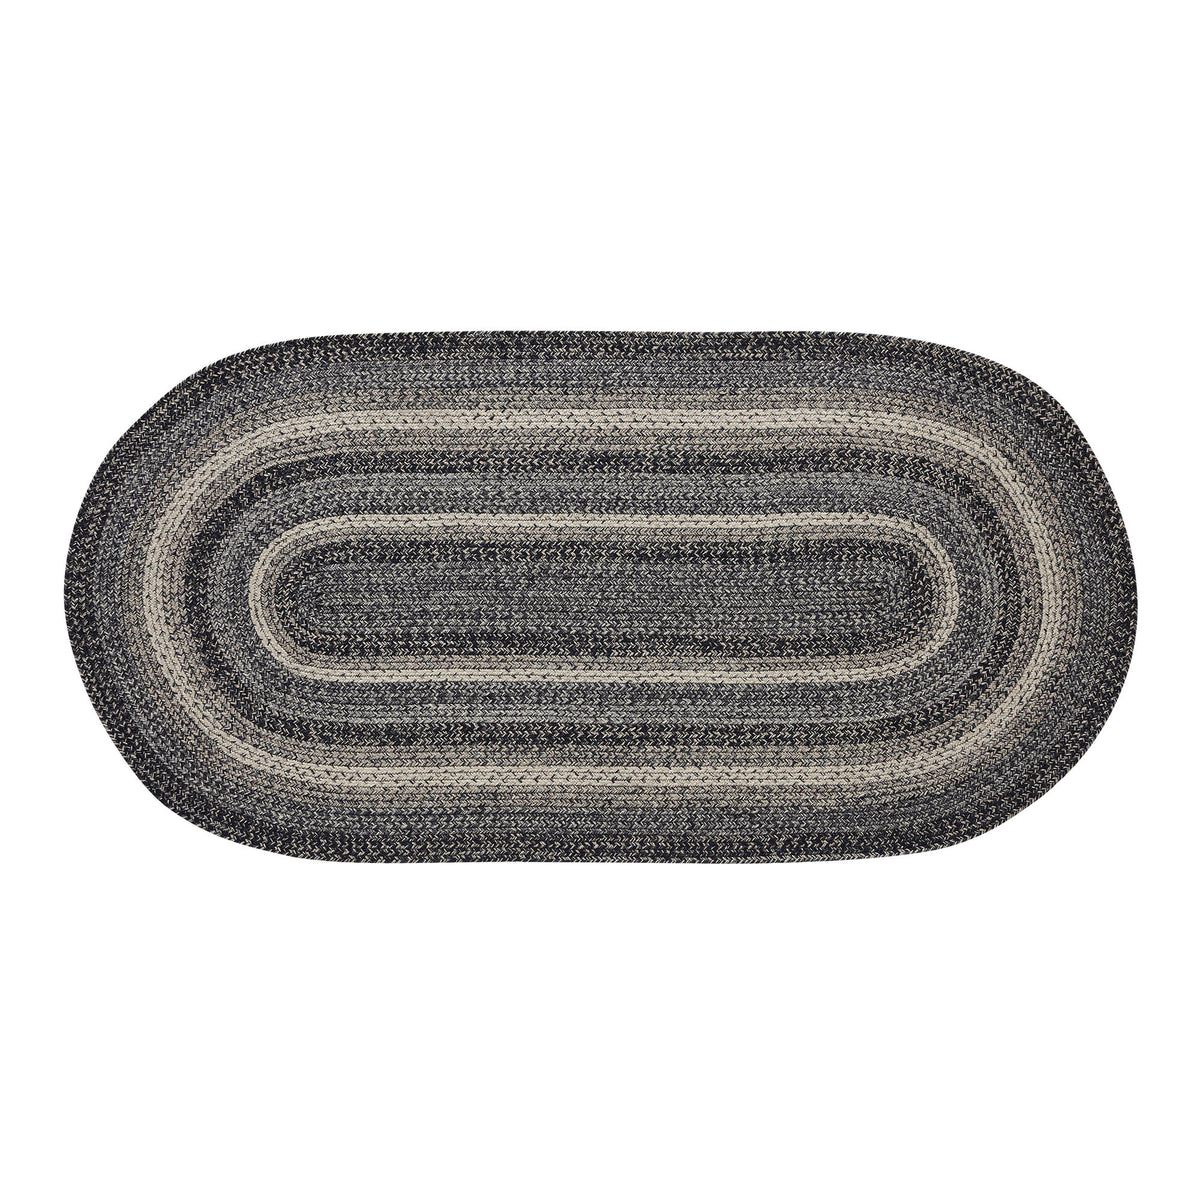 https://cdn.shopify.com/s/files/1/0078/7408/4915/products/83539-Sawyer-Mill-Black-White-Jute-Rug-Oval-w-Pad-36x72-detailed-image-2.jpg?v=1678718210&width=1200